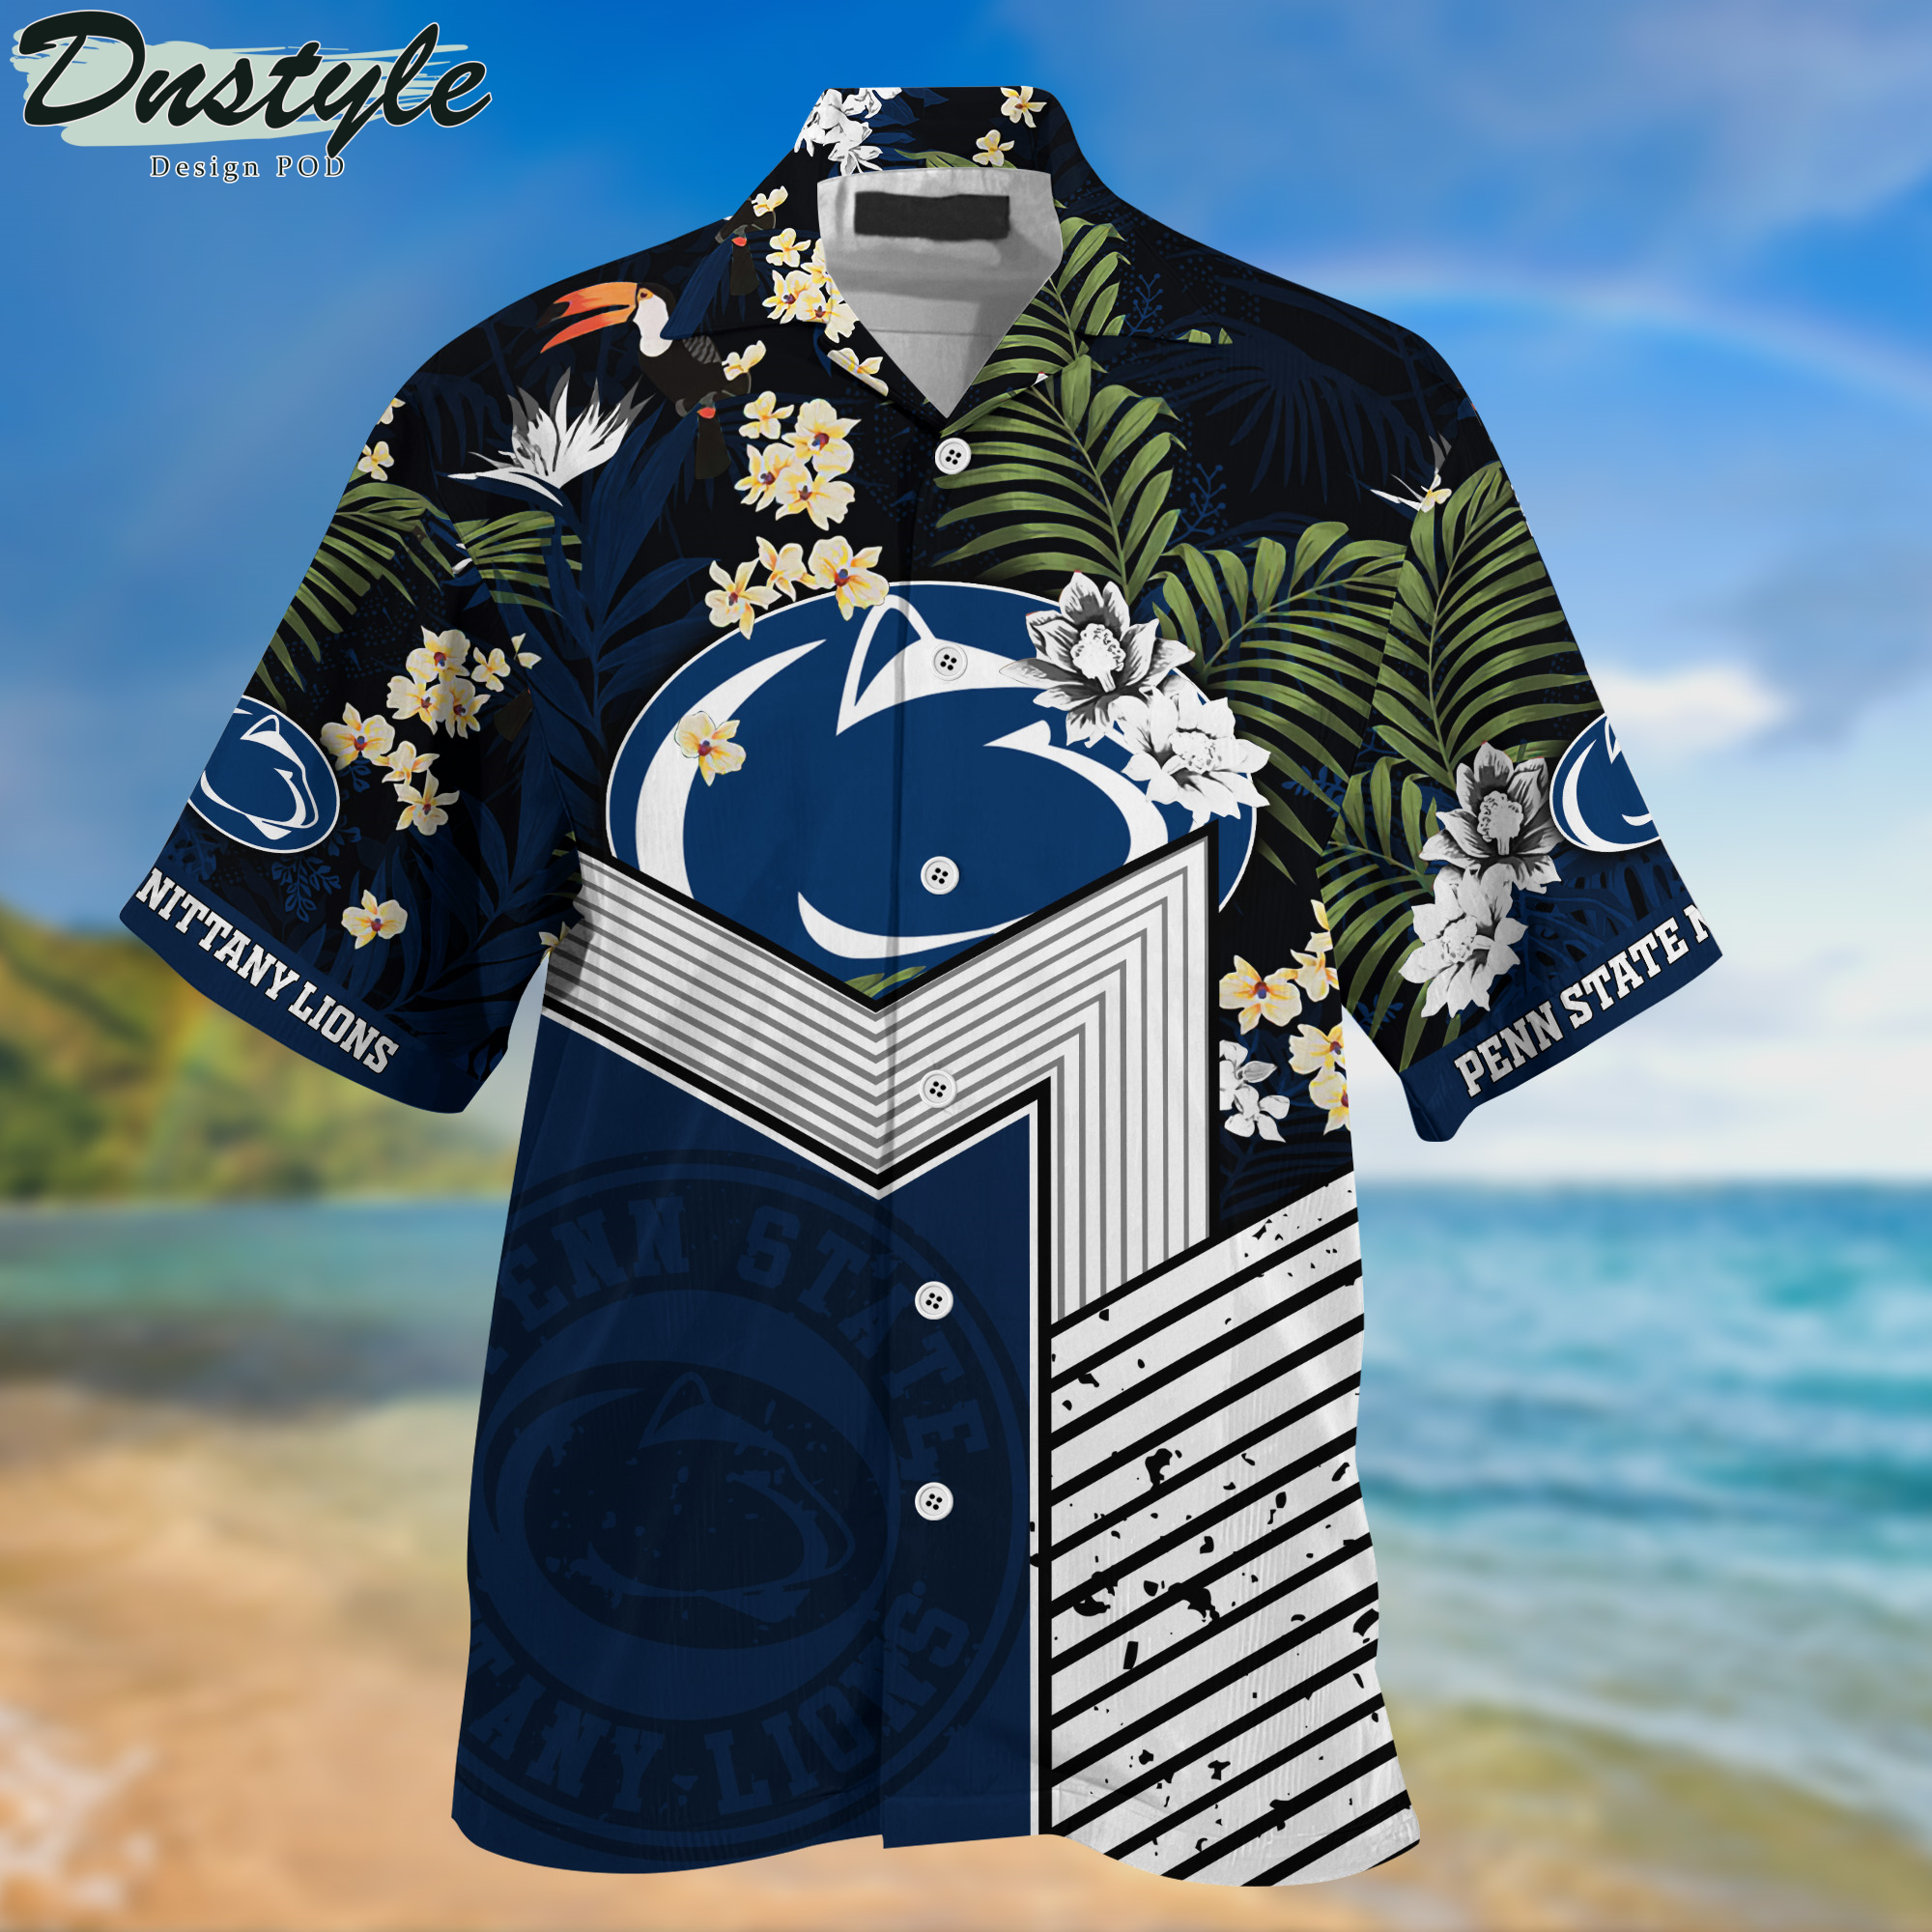 Penn State Nittany Lions Hawaii Shirt And Shorts New Collection